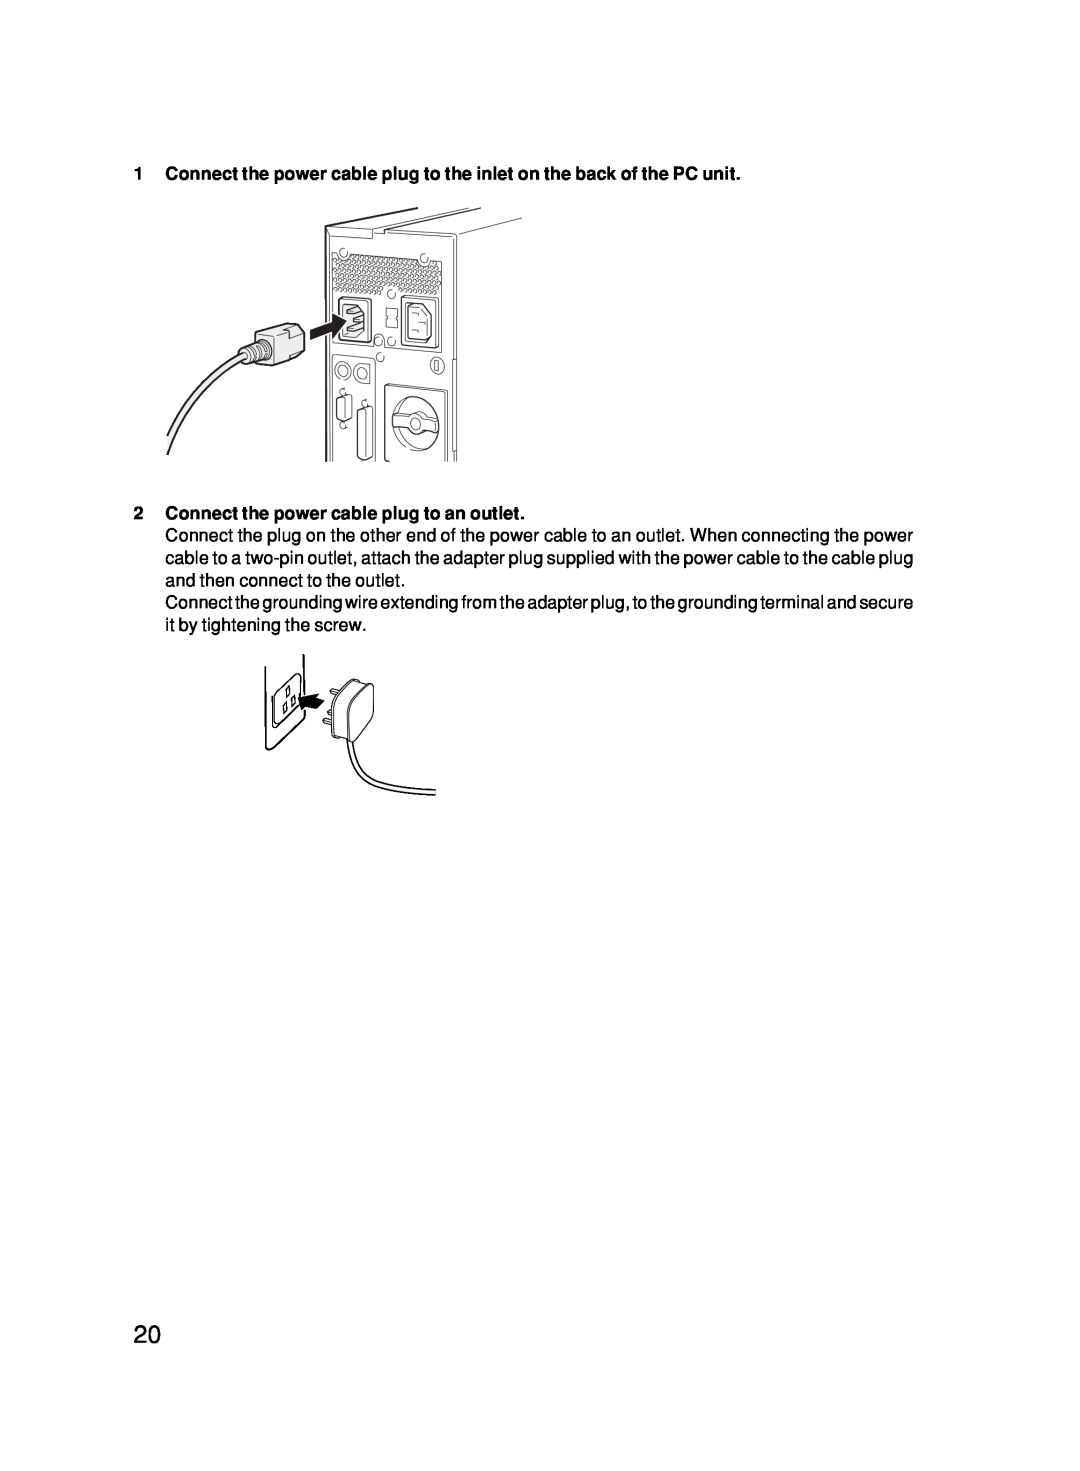 Fujitsu 500 user manual Connect the power cable plug to an outlet 